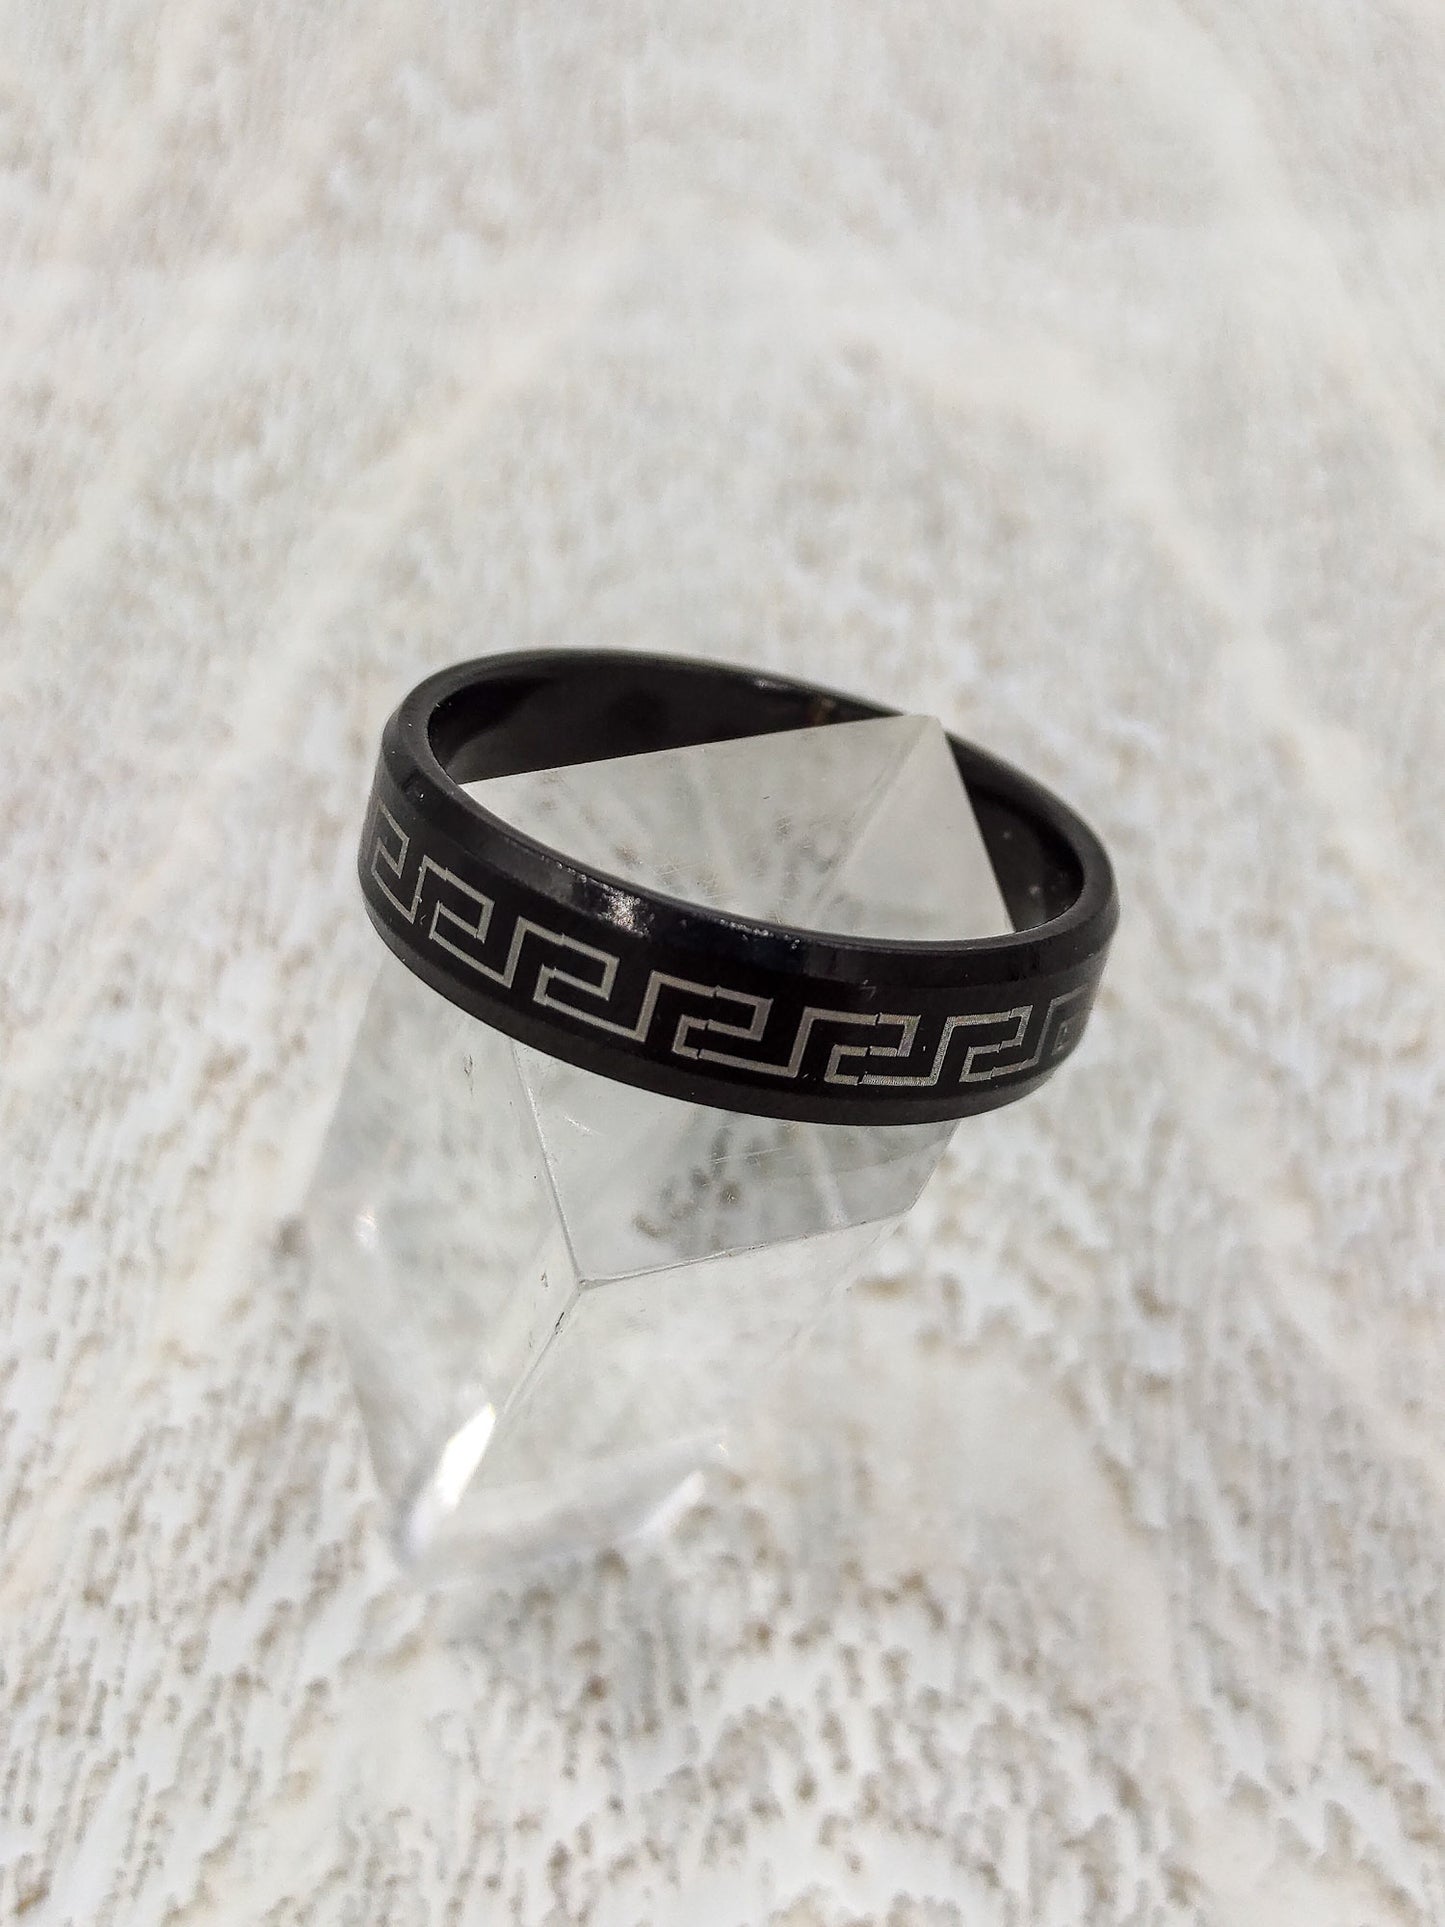 Black steel ring with silver meander - R057